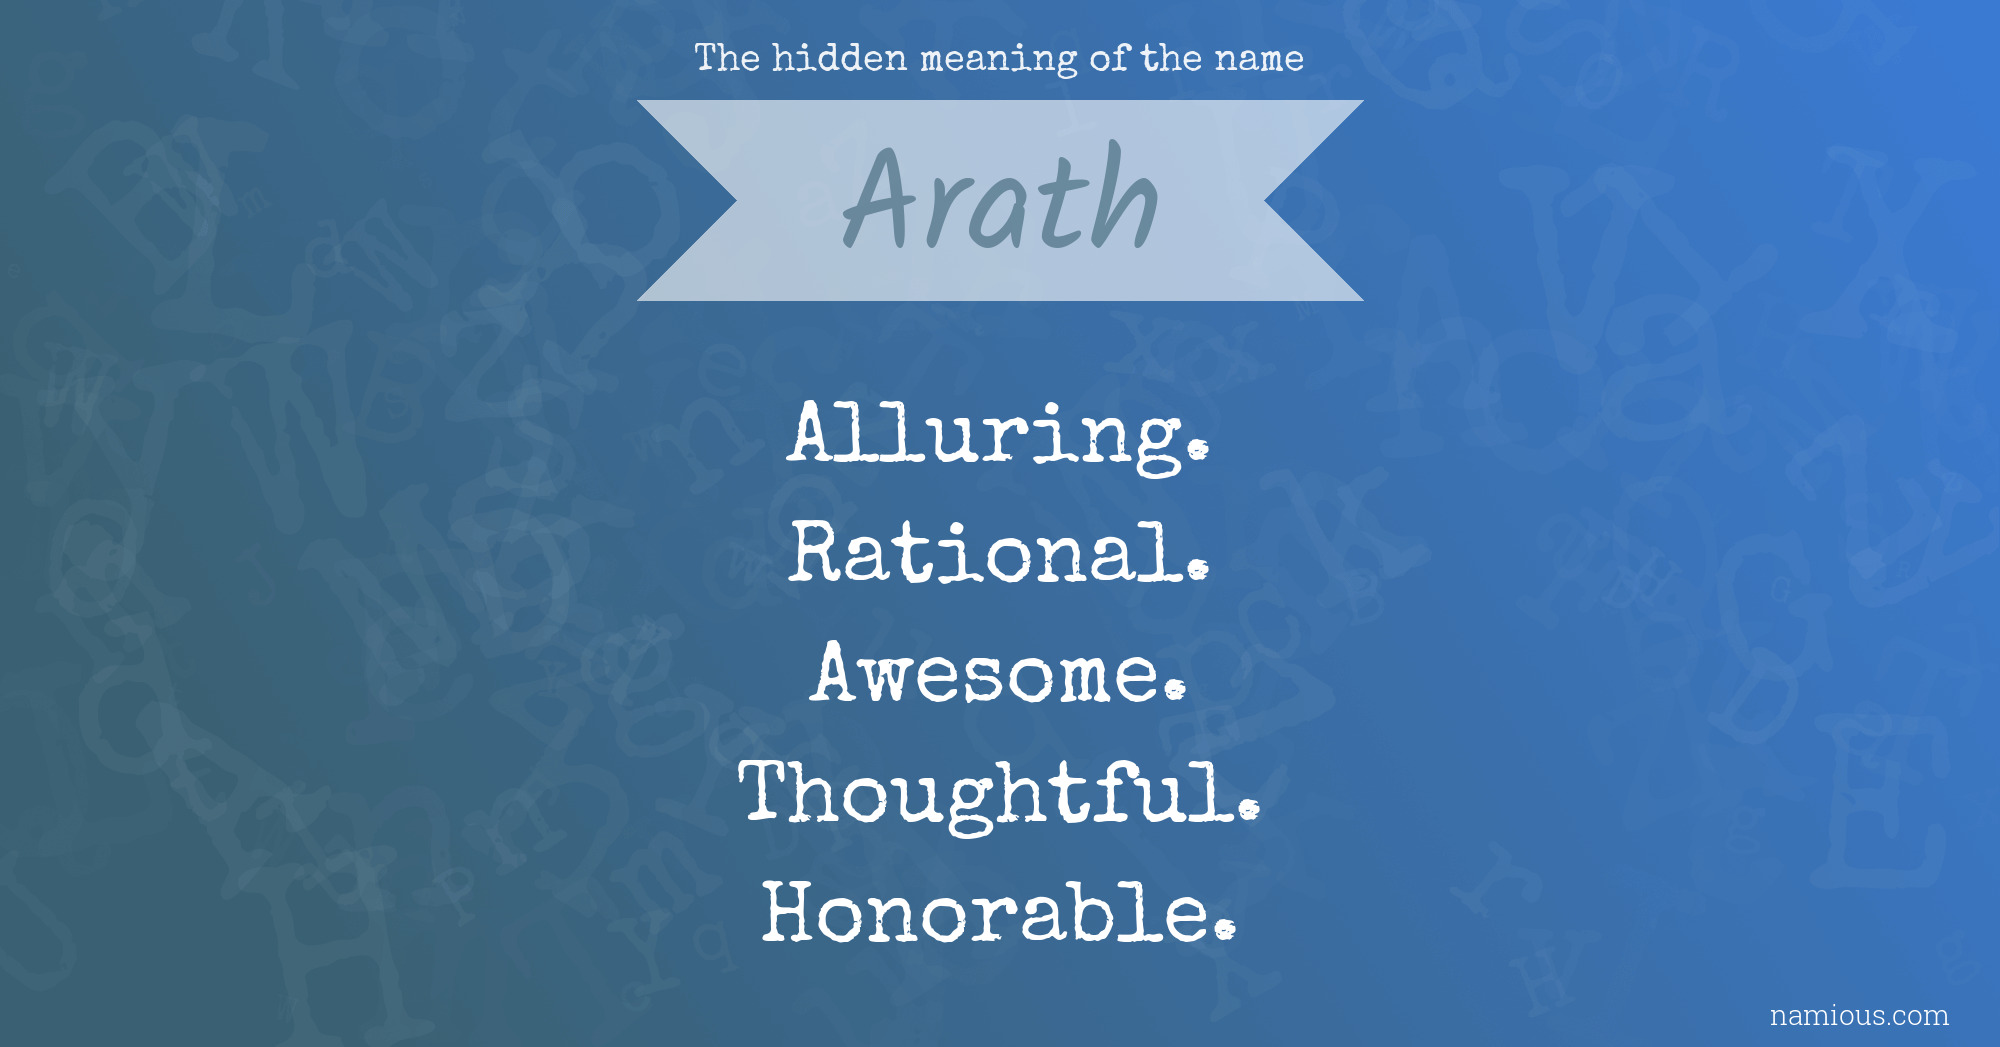 The hidden meaning of the name Arath